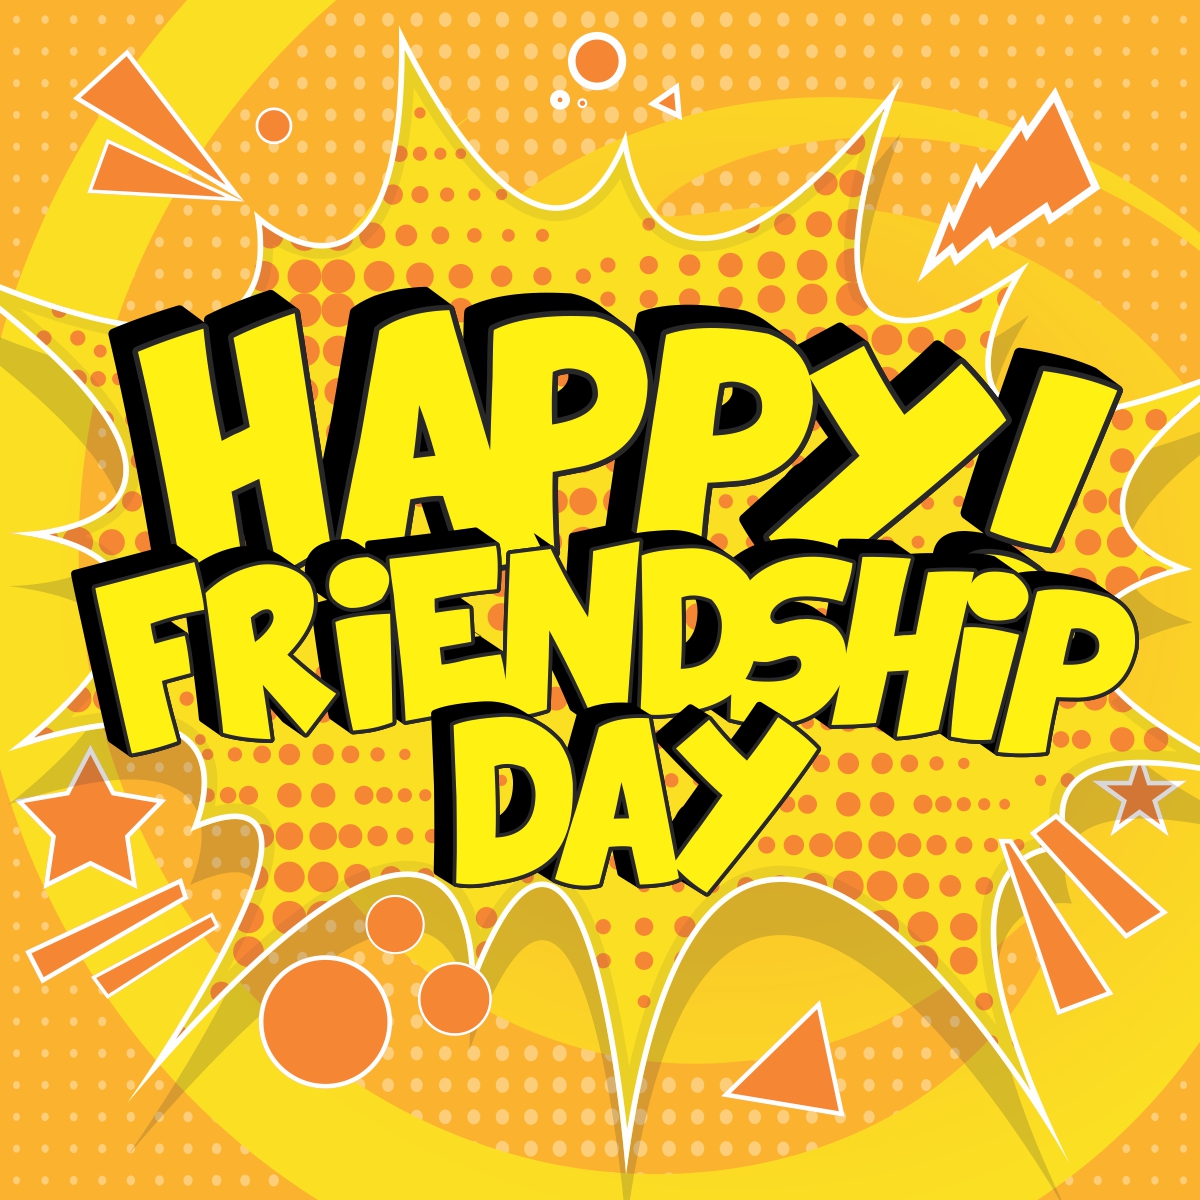 Happy Friendship Day Comical Stylish Greeting